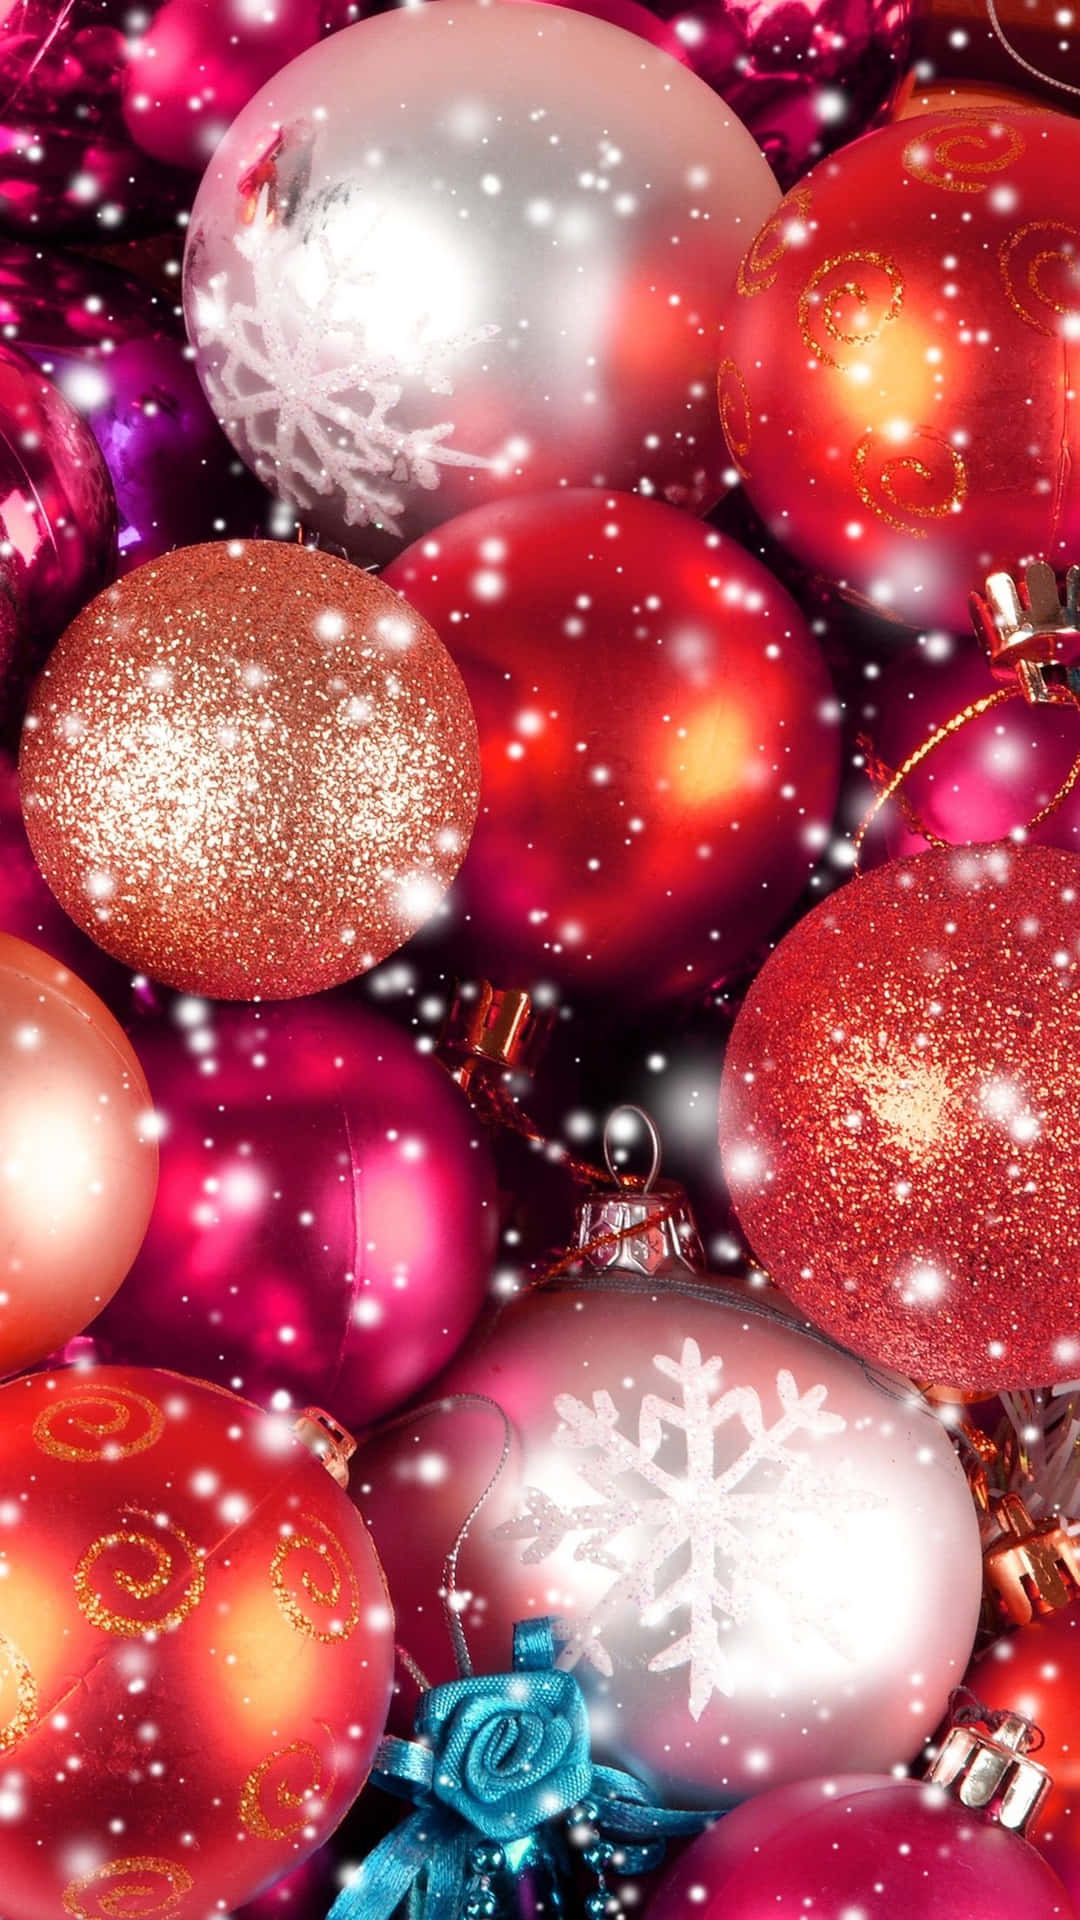 Show Off Your Festive Holiday Style With This Unique Christmas Cell Phone Background